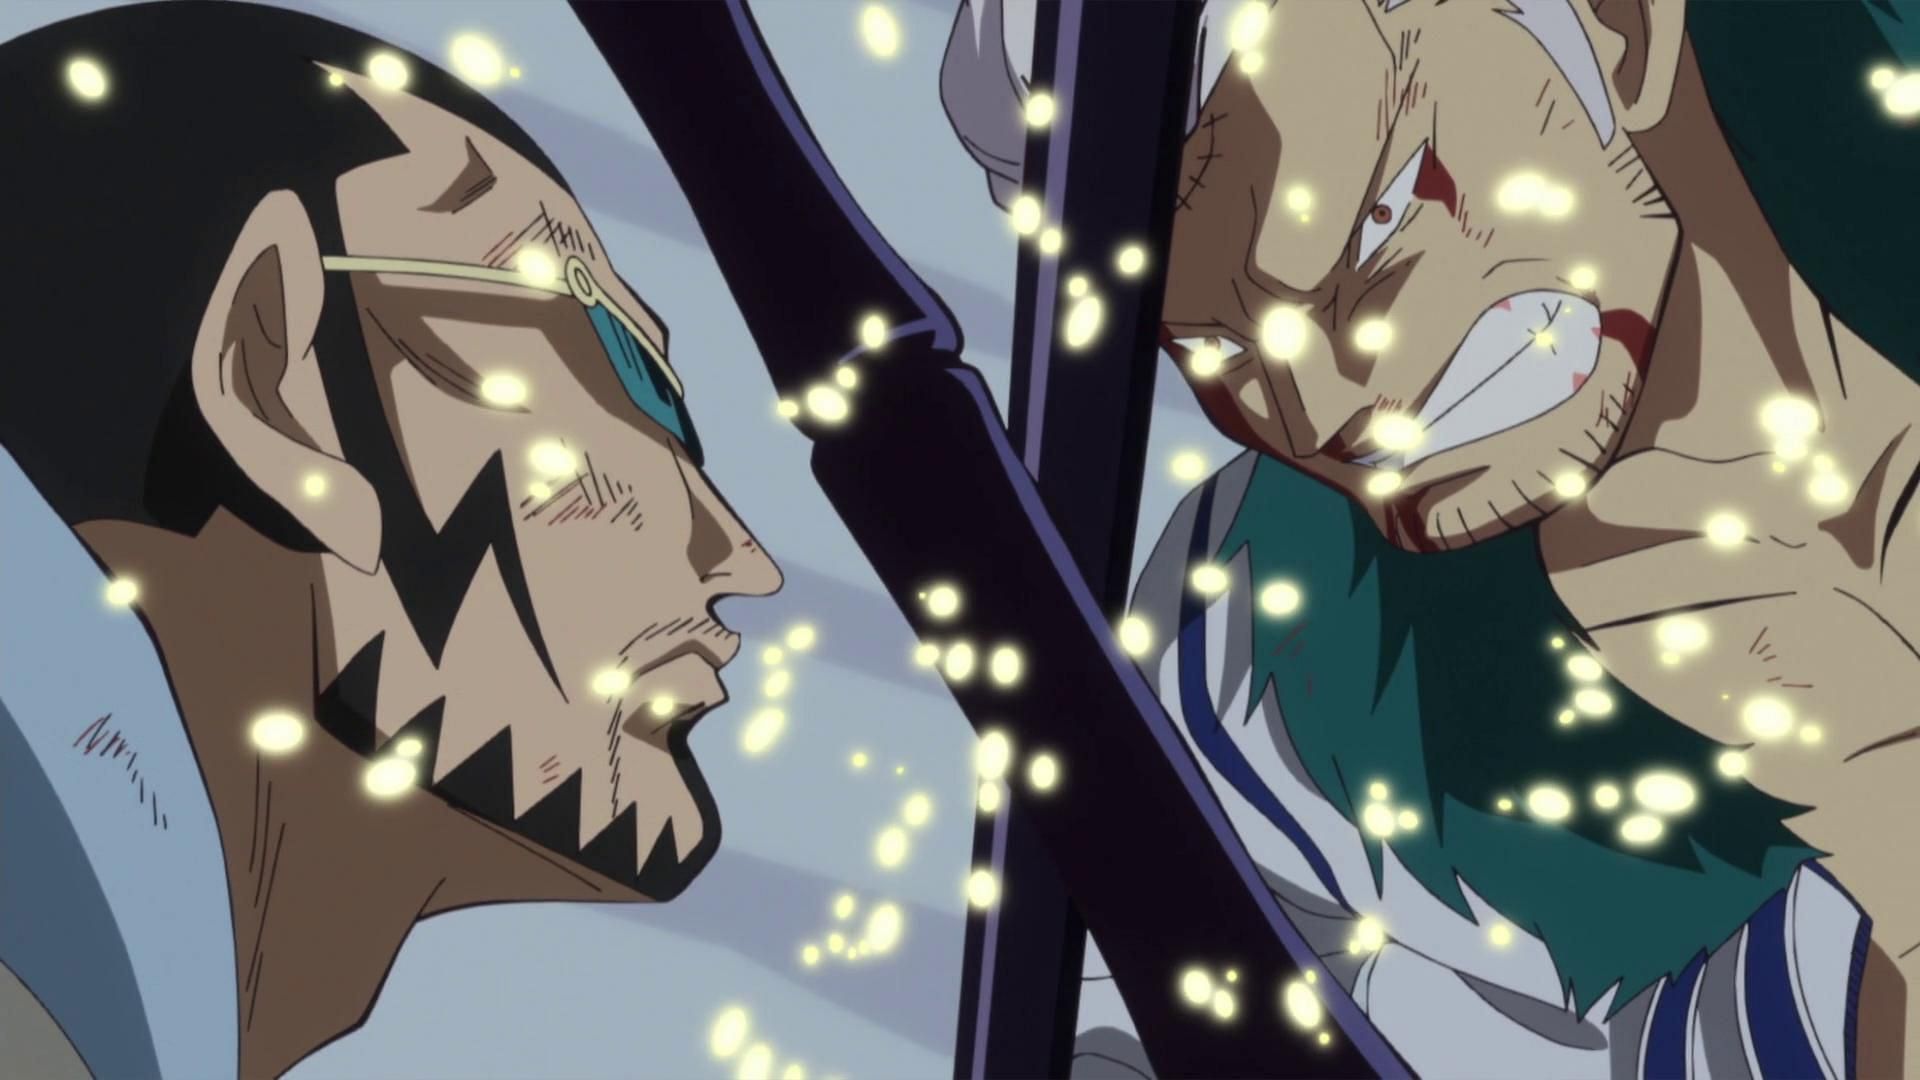 Fans expected much more from Smoker (Image via Toei Animation, One Piece)